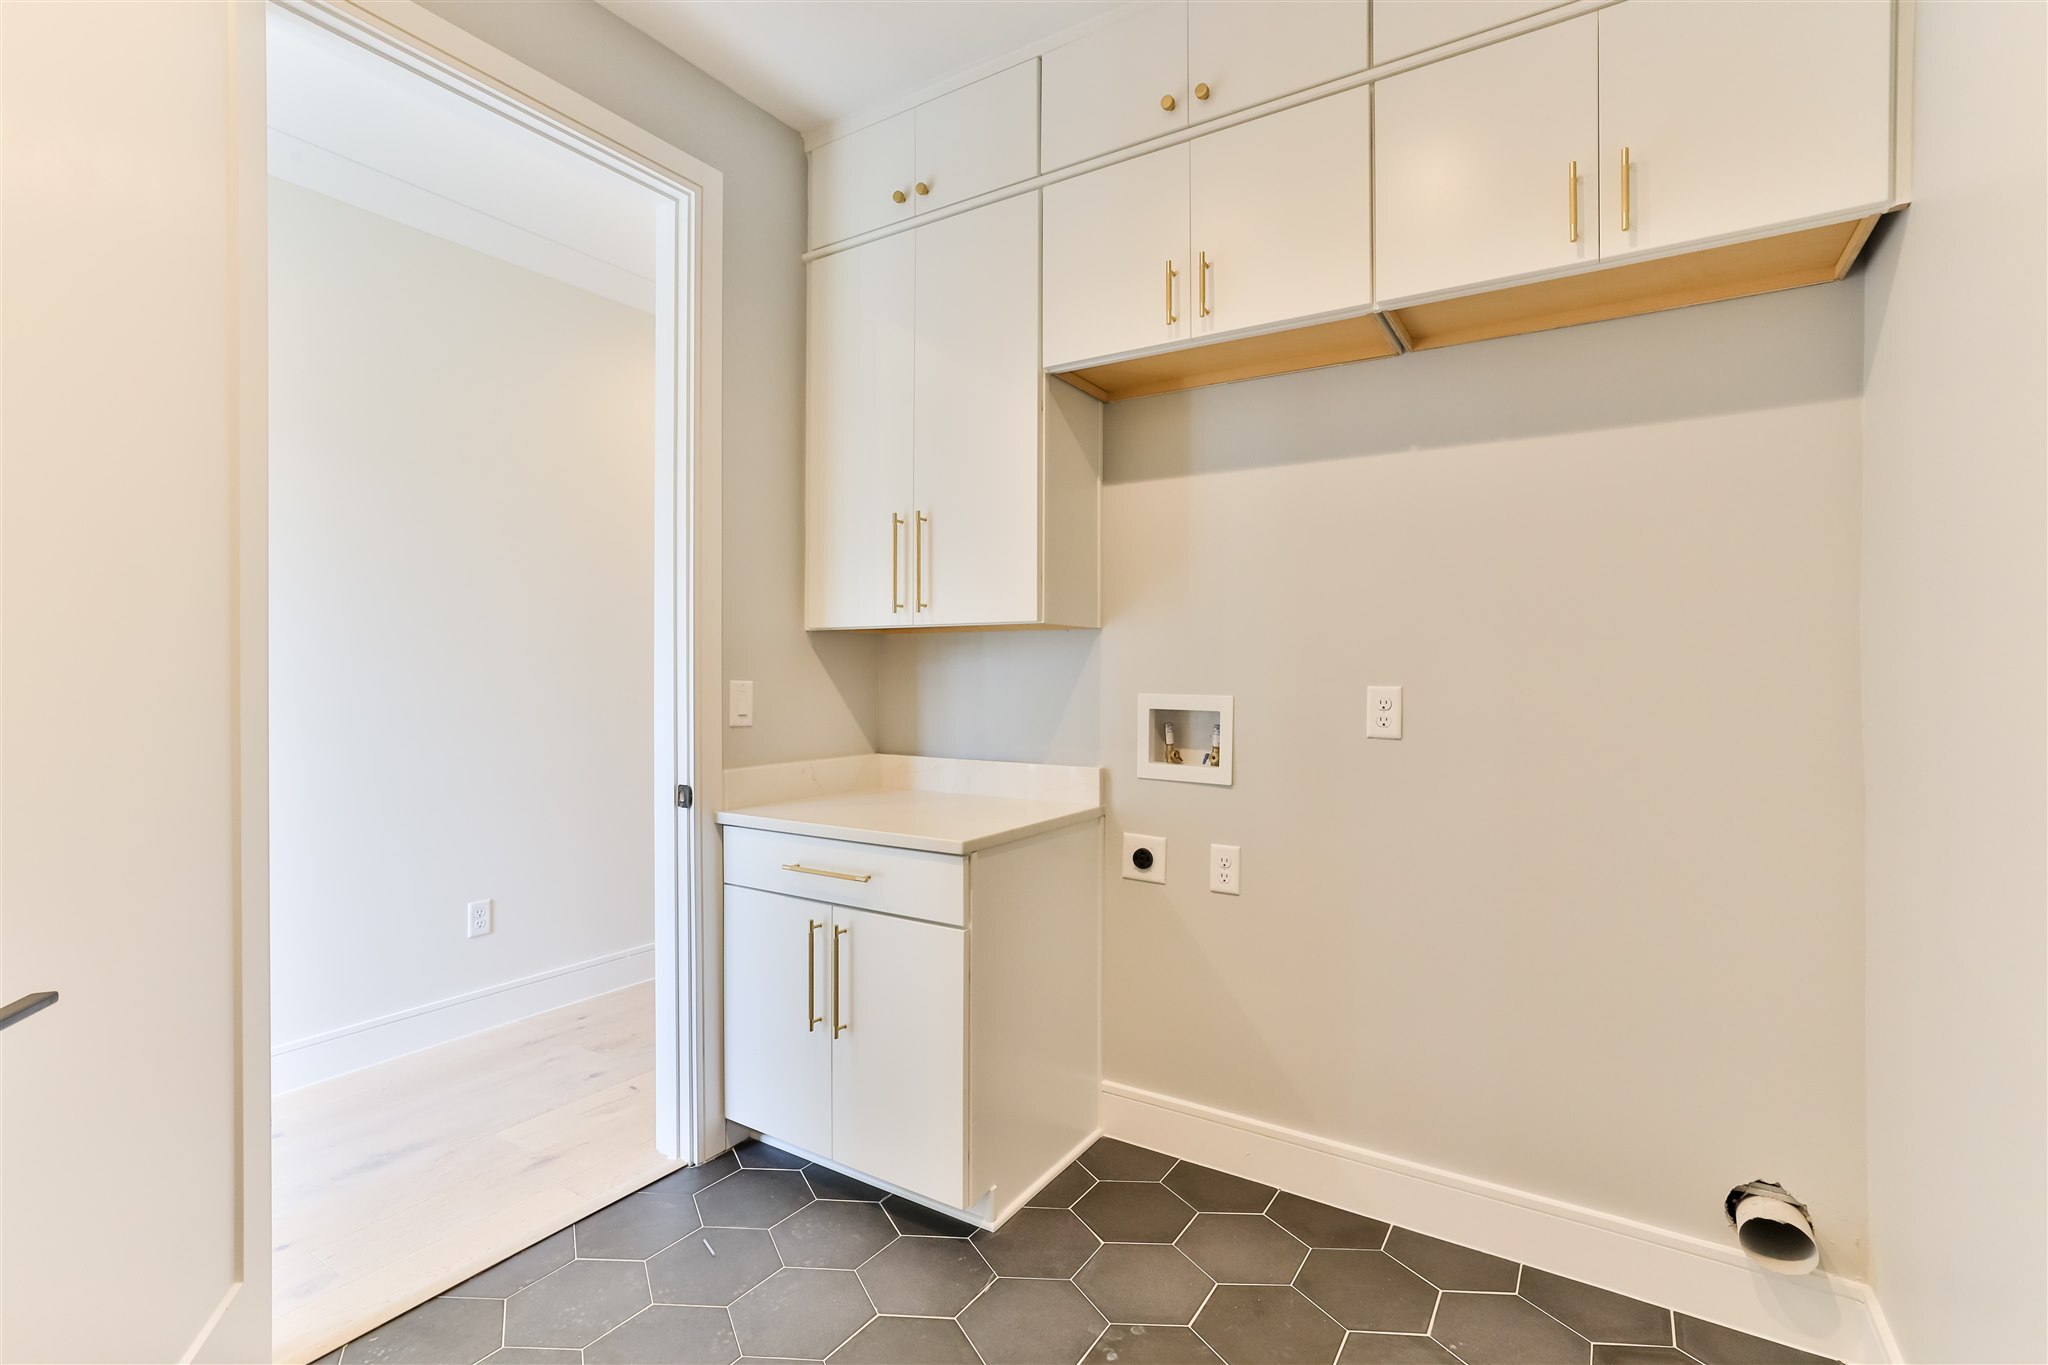 1st floor guest suite with kitchenette, storage, private entry, laundry room 